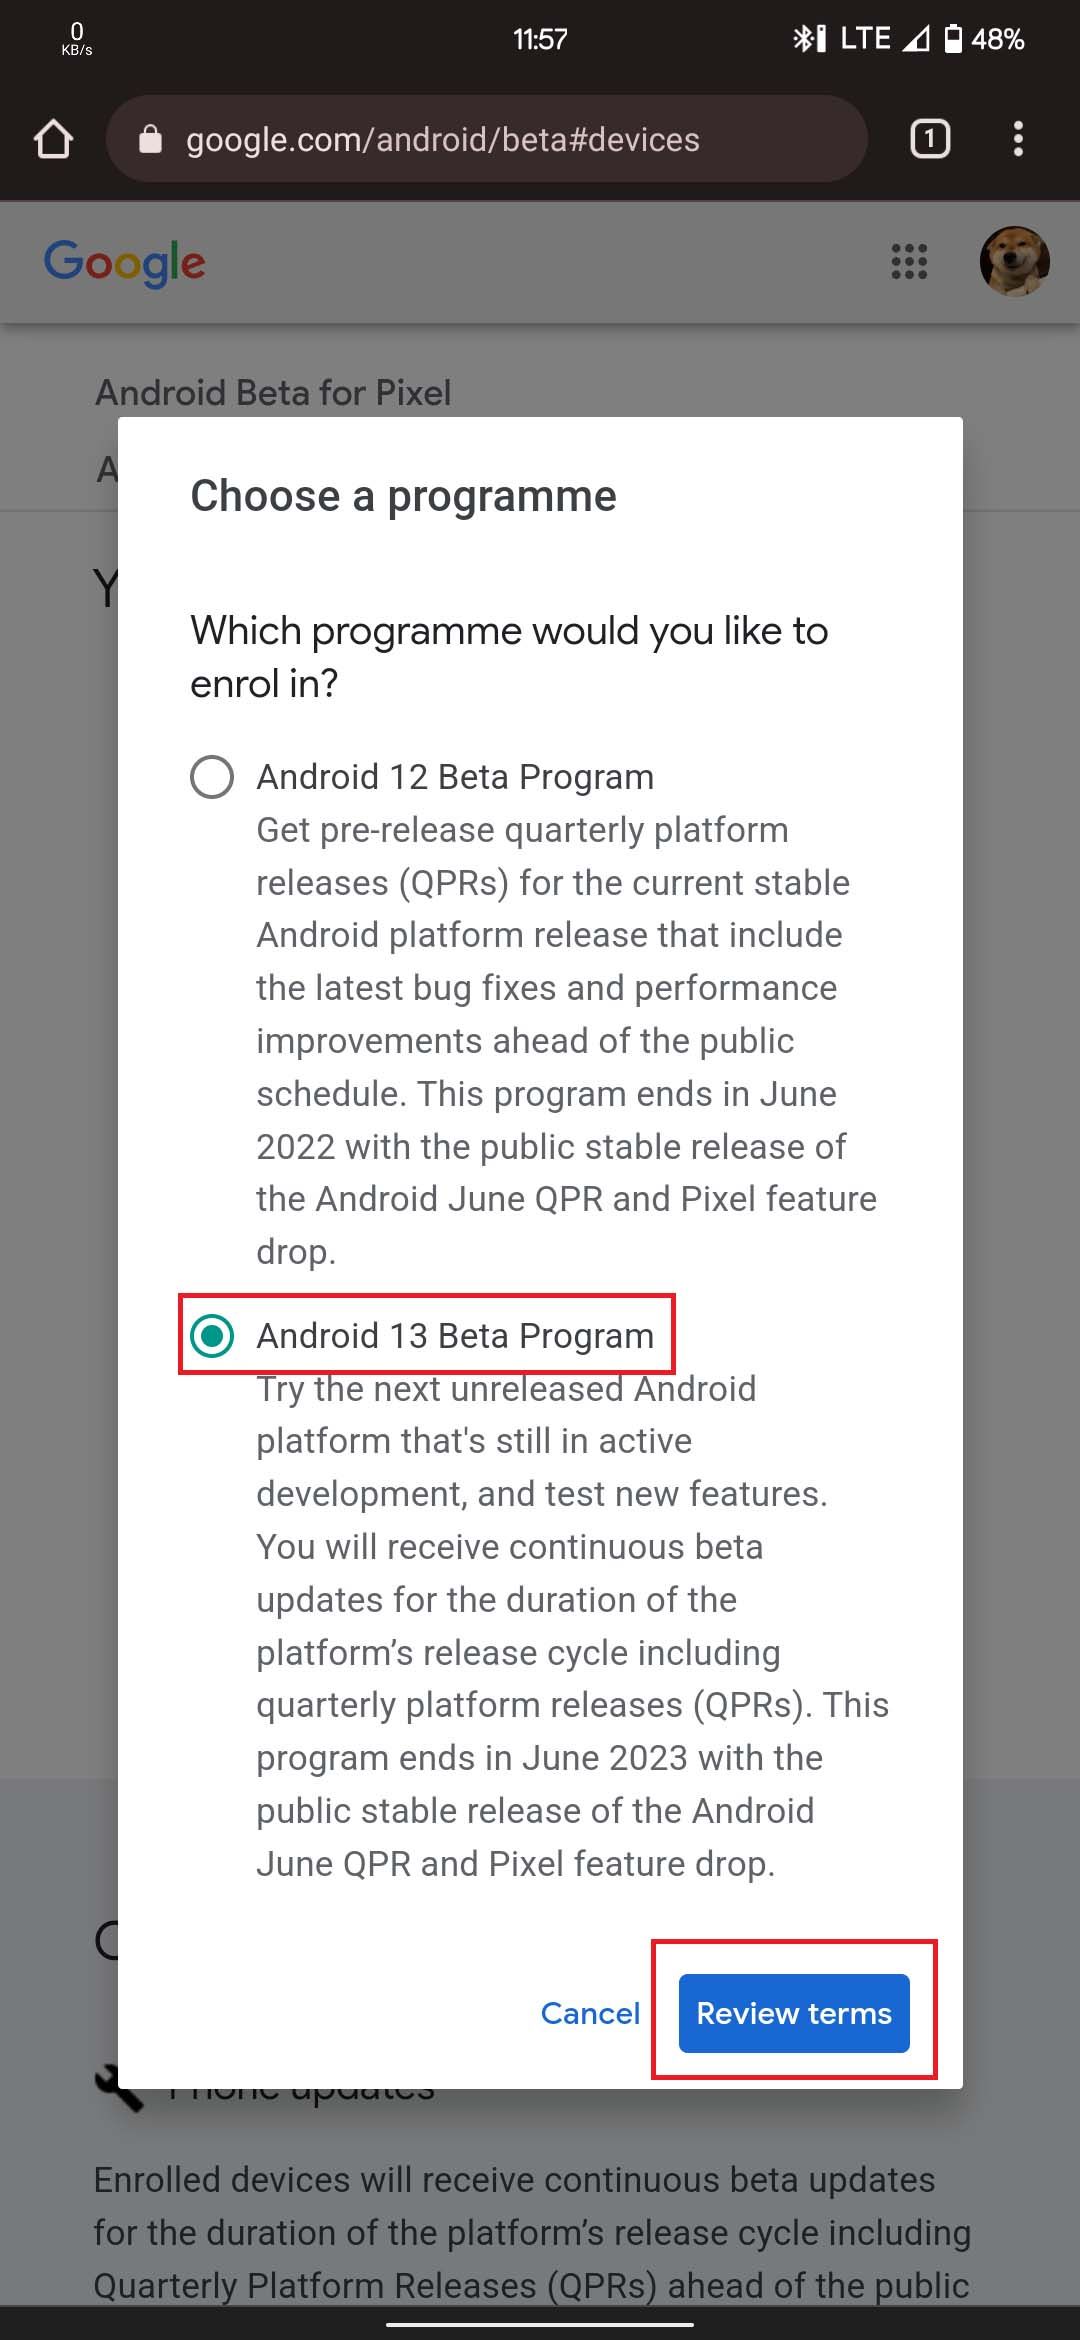 Selecting the Android 13 Beta Program